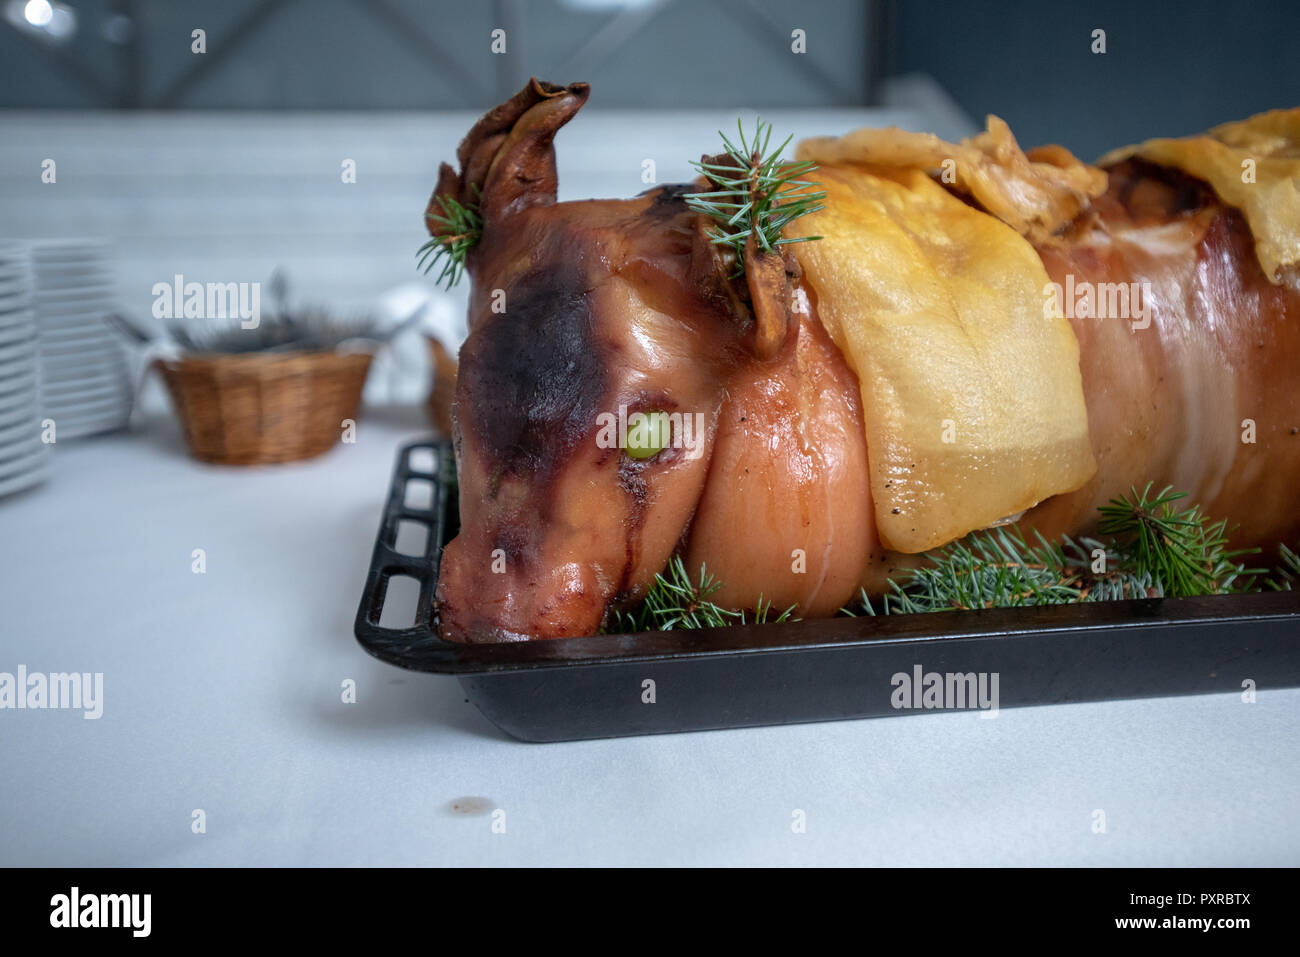 Close-up of roasted pig head garnished with grapes and pine leaves for Polish banquet, Masovian Voivodeship, Poland Stock Photo